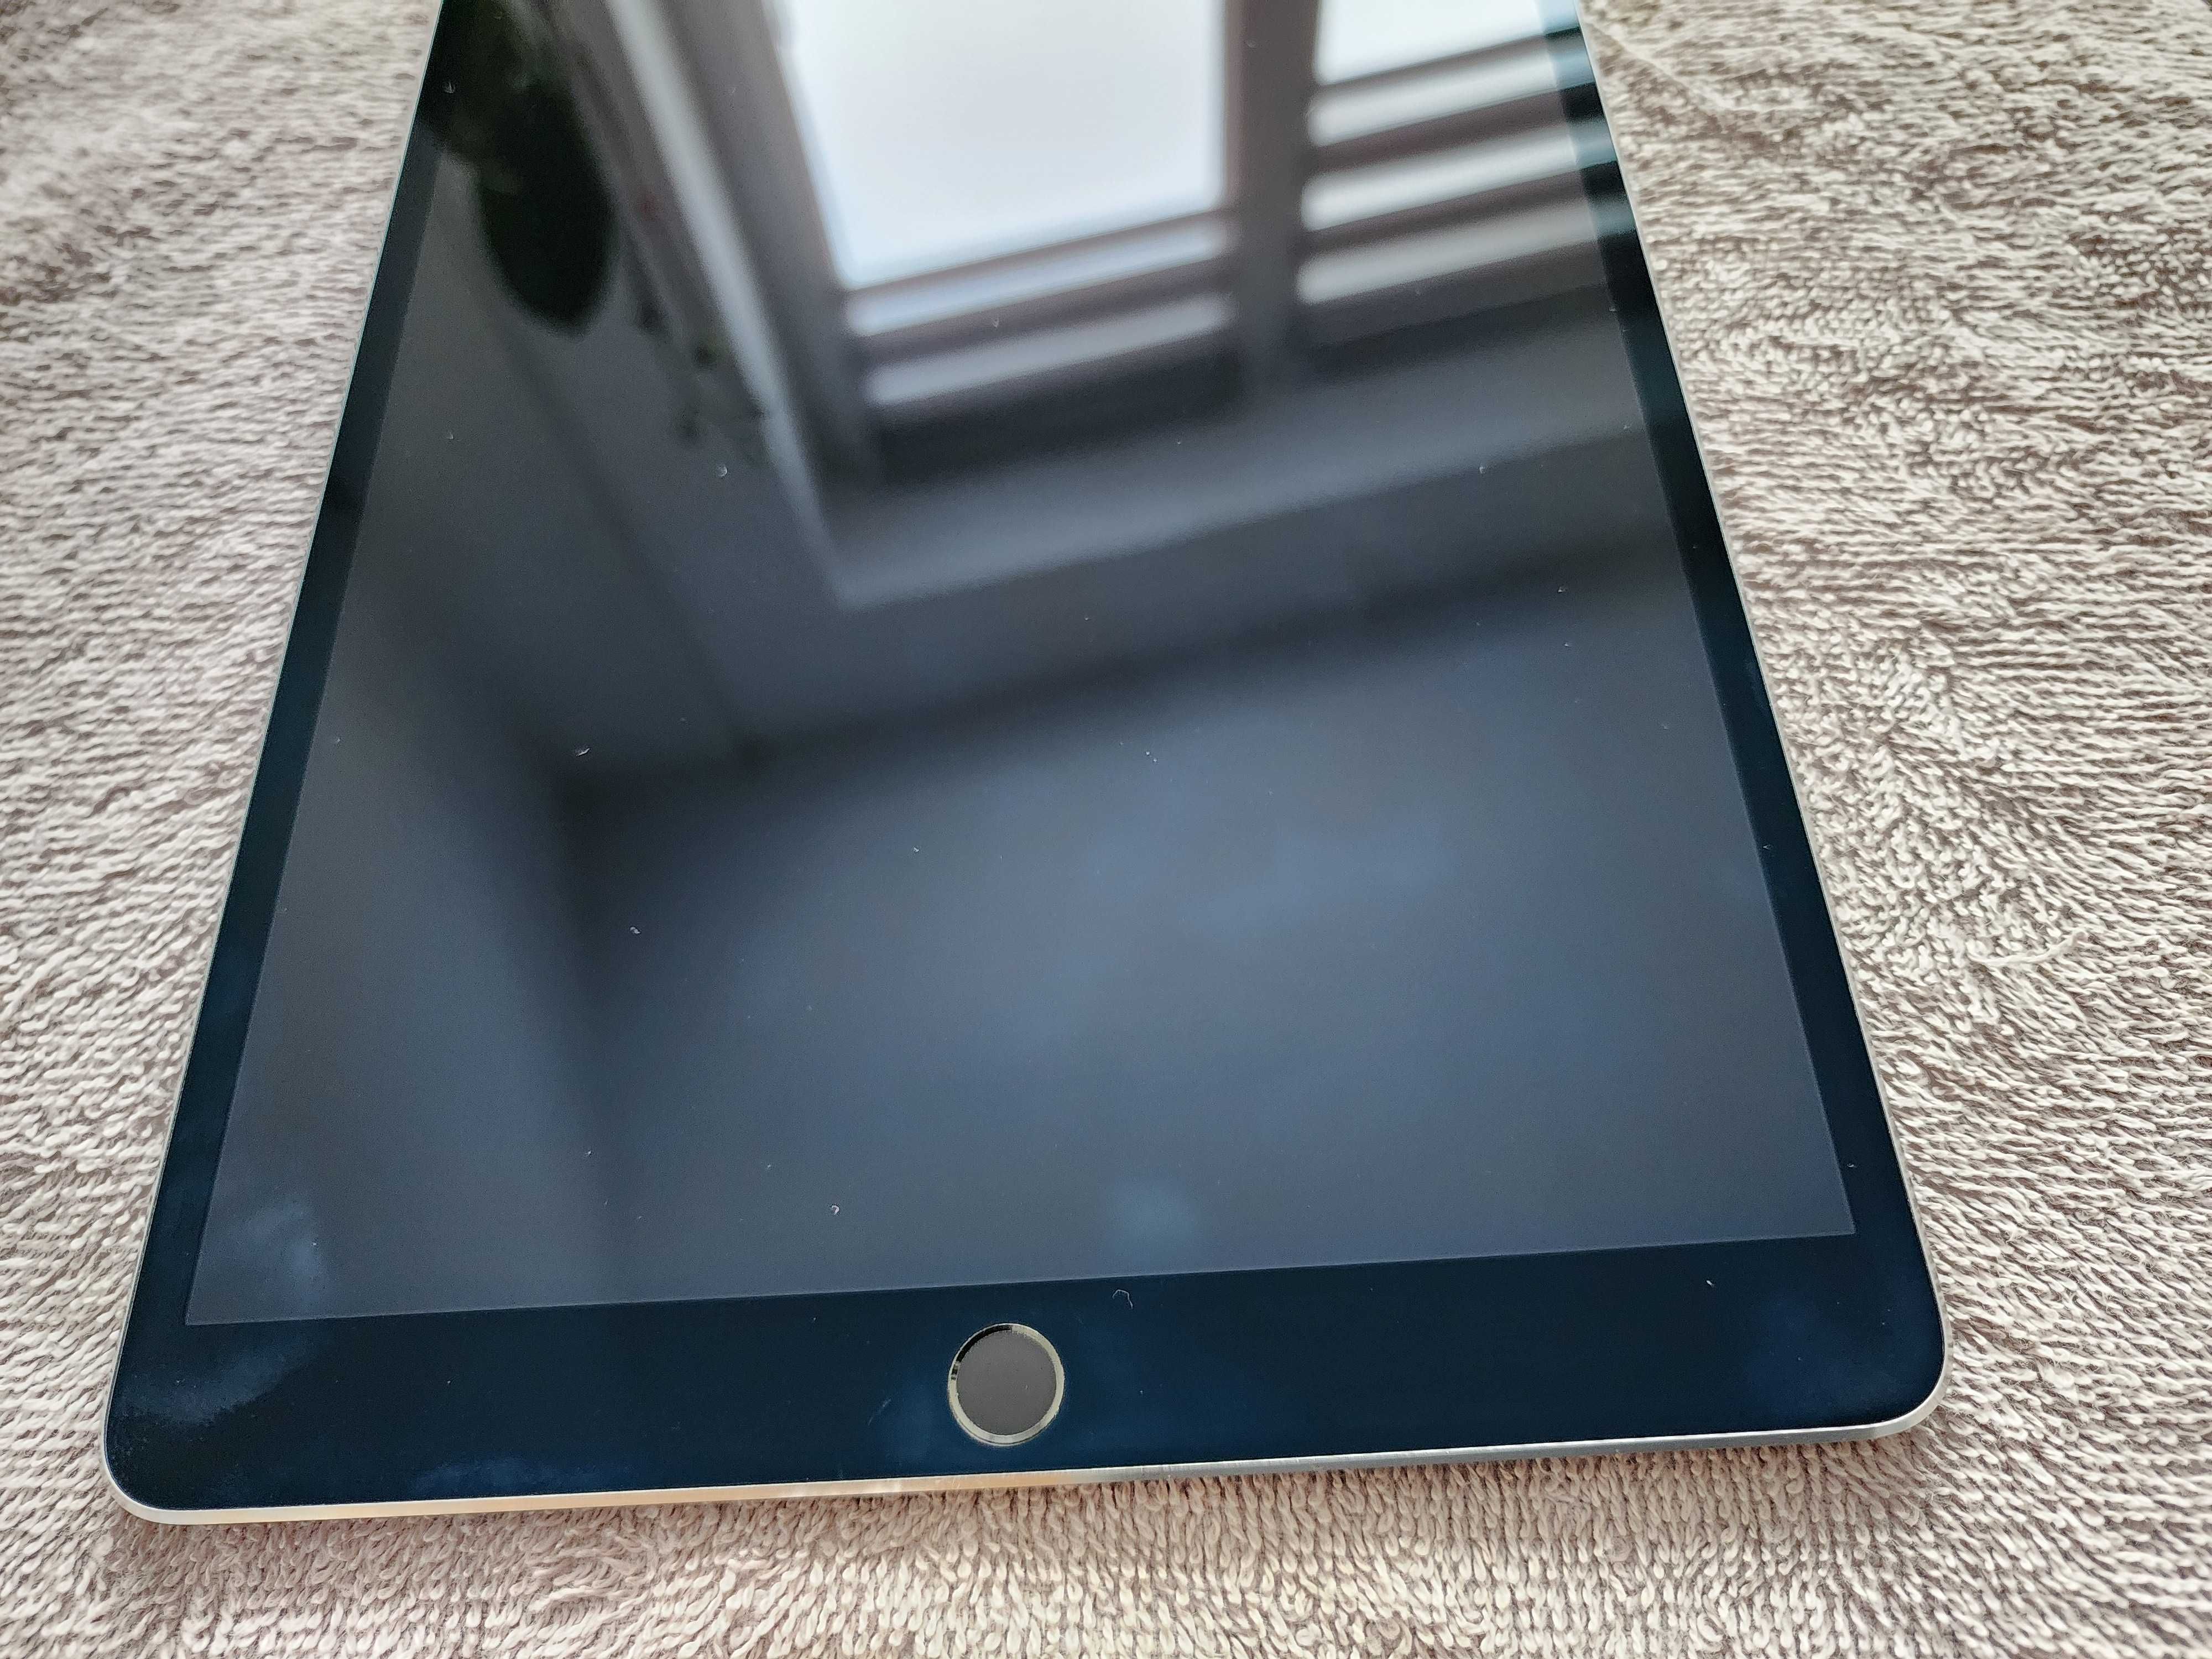 iPad Pro 2nd Generation 10.5" in, 64GB, Wi-Fi LTE + Cellular A1709